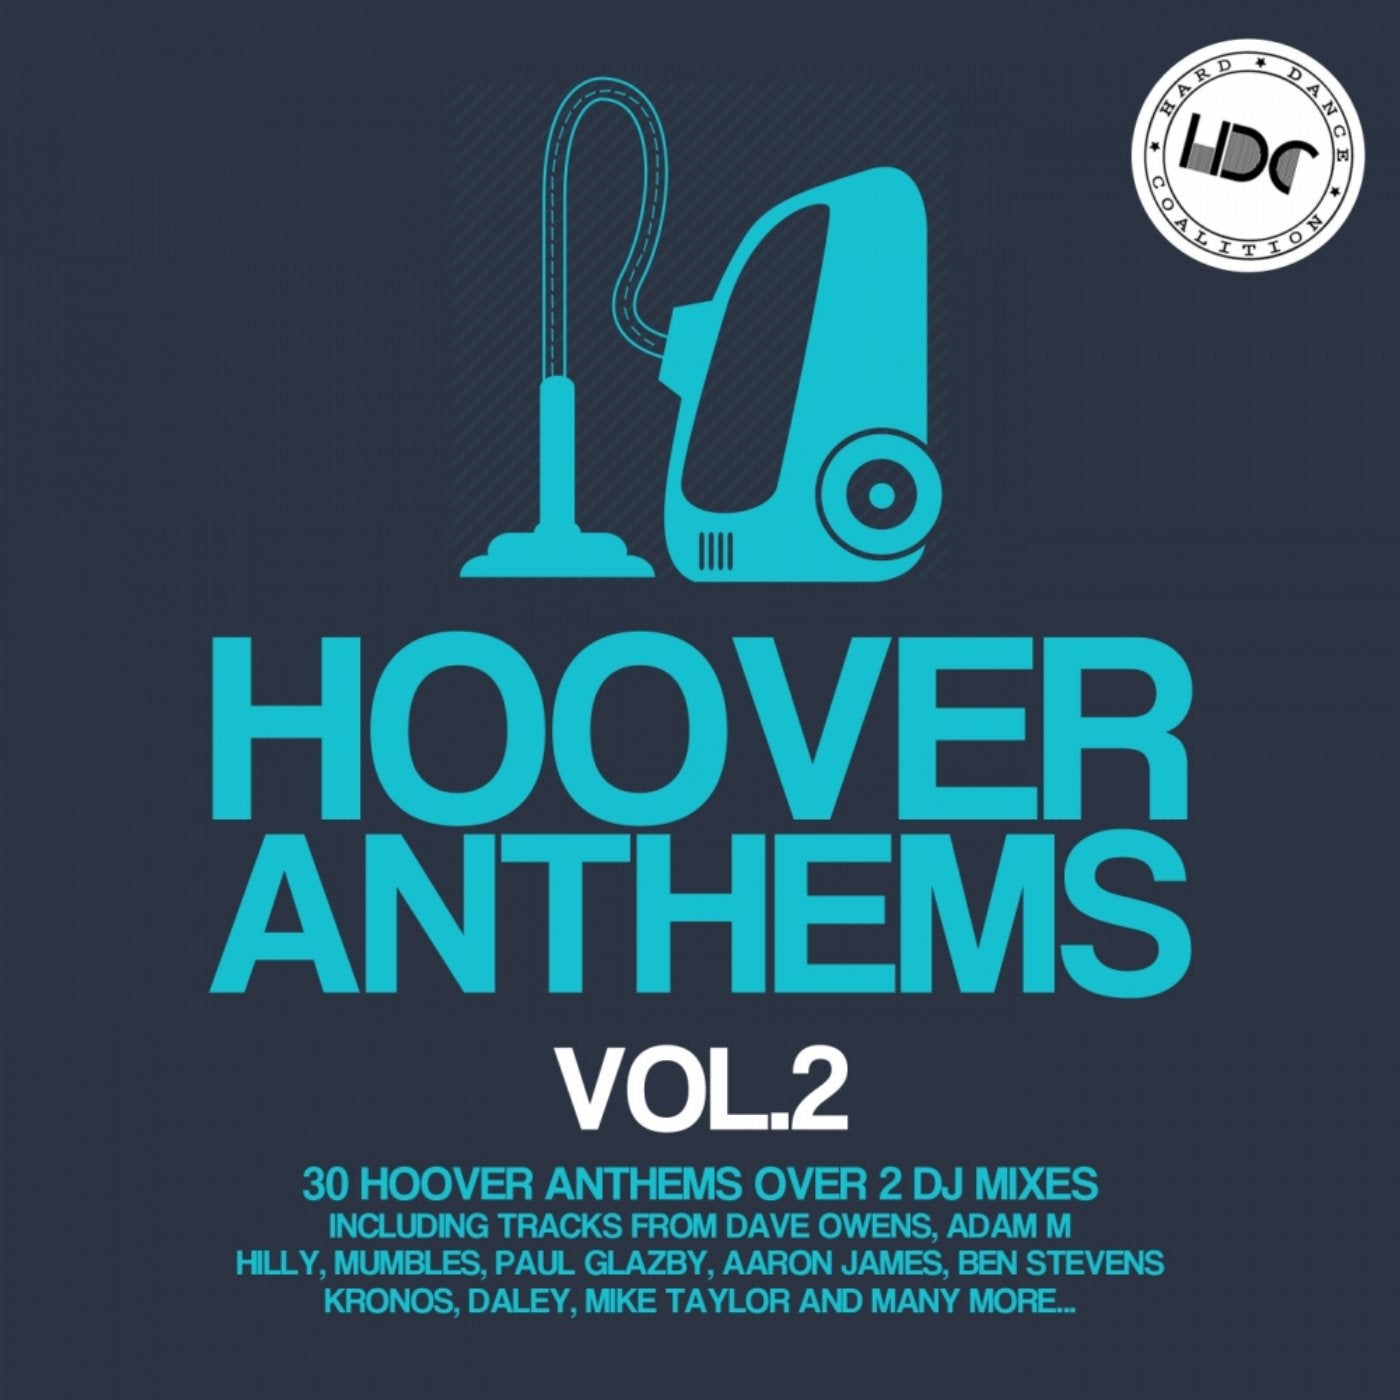 Hoover Anthems, Vol. 2